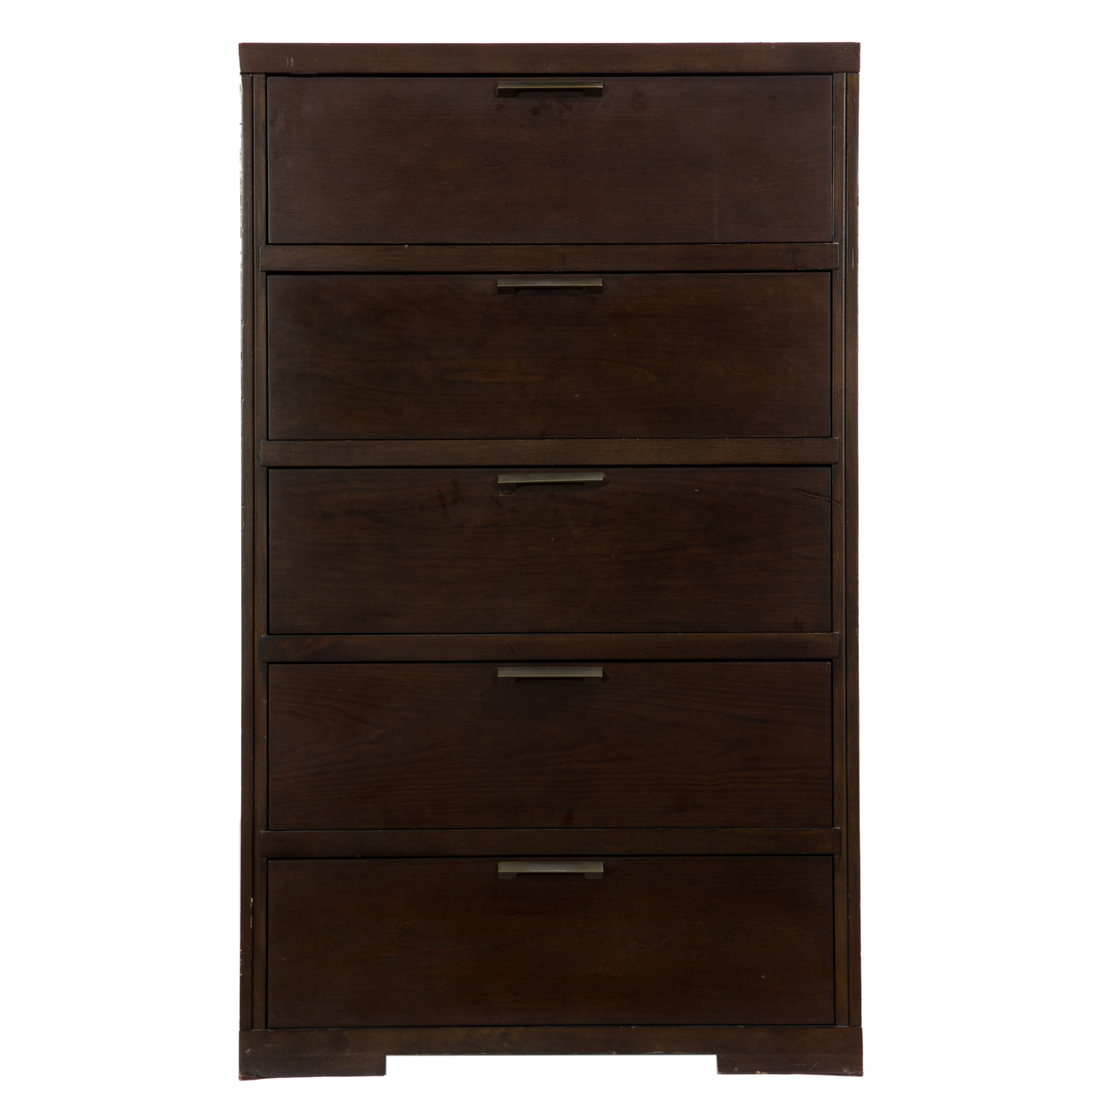 A CONTEMPORARY TALL CHEST OF DRAWERS 3cdb22